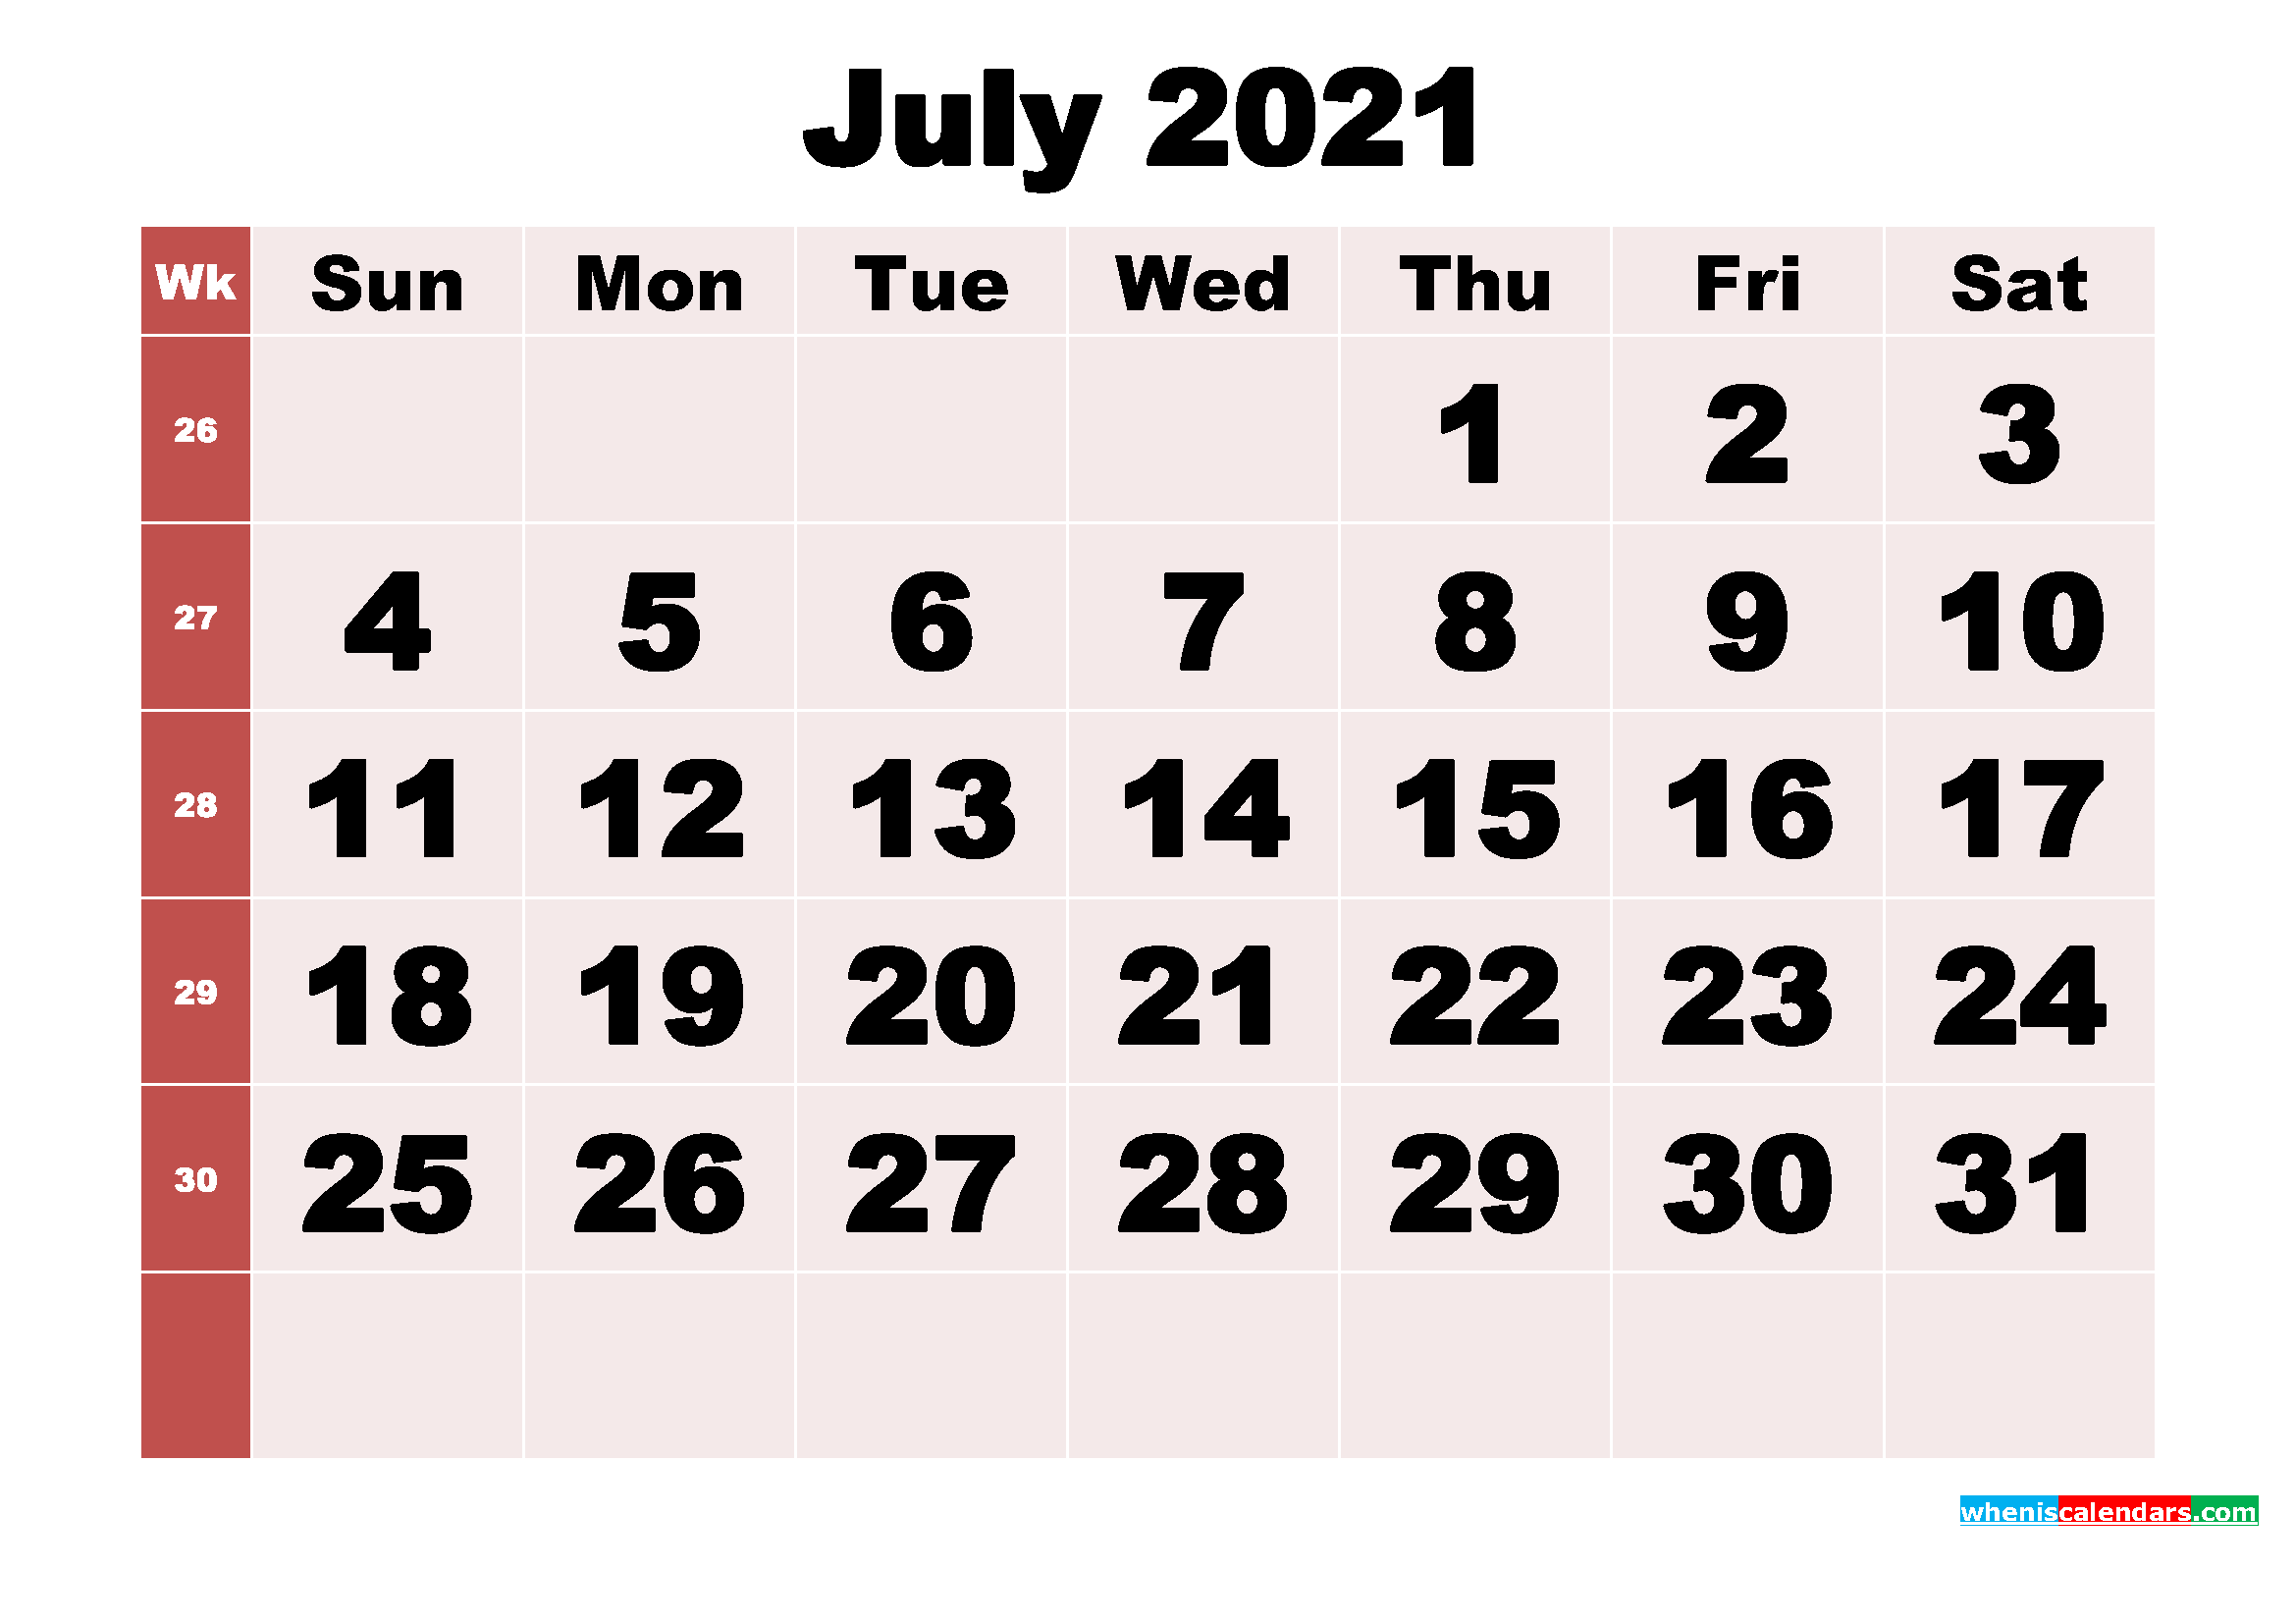 Free Printable Monthly Calendar July 2021